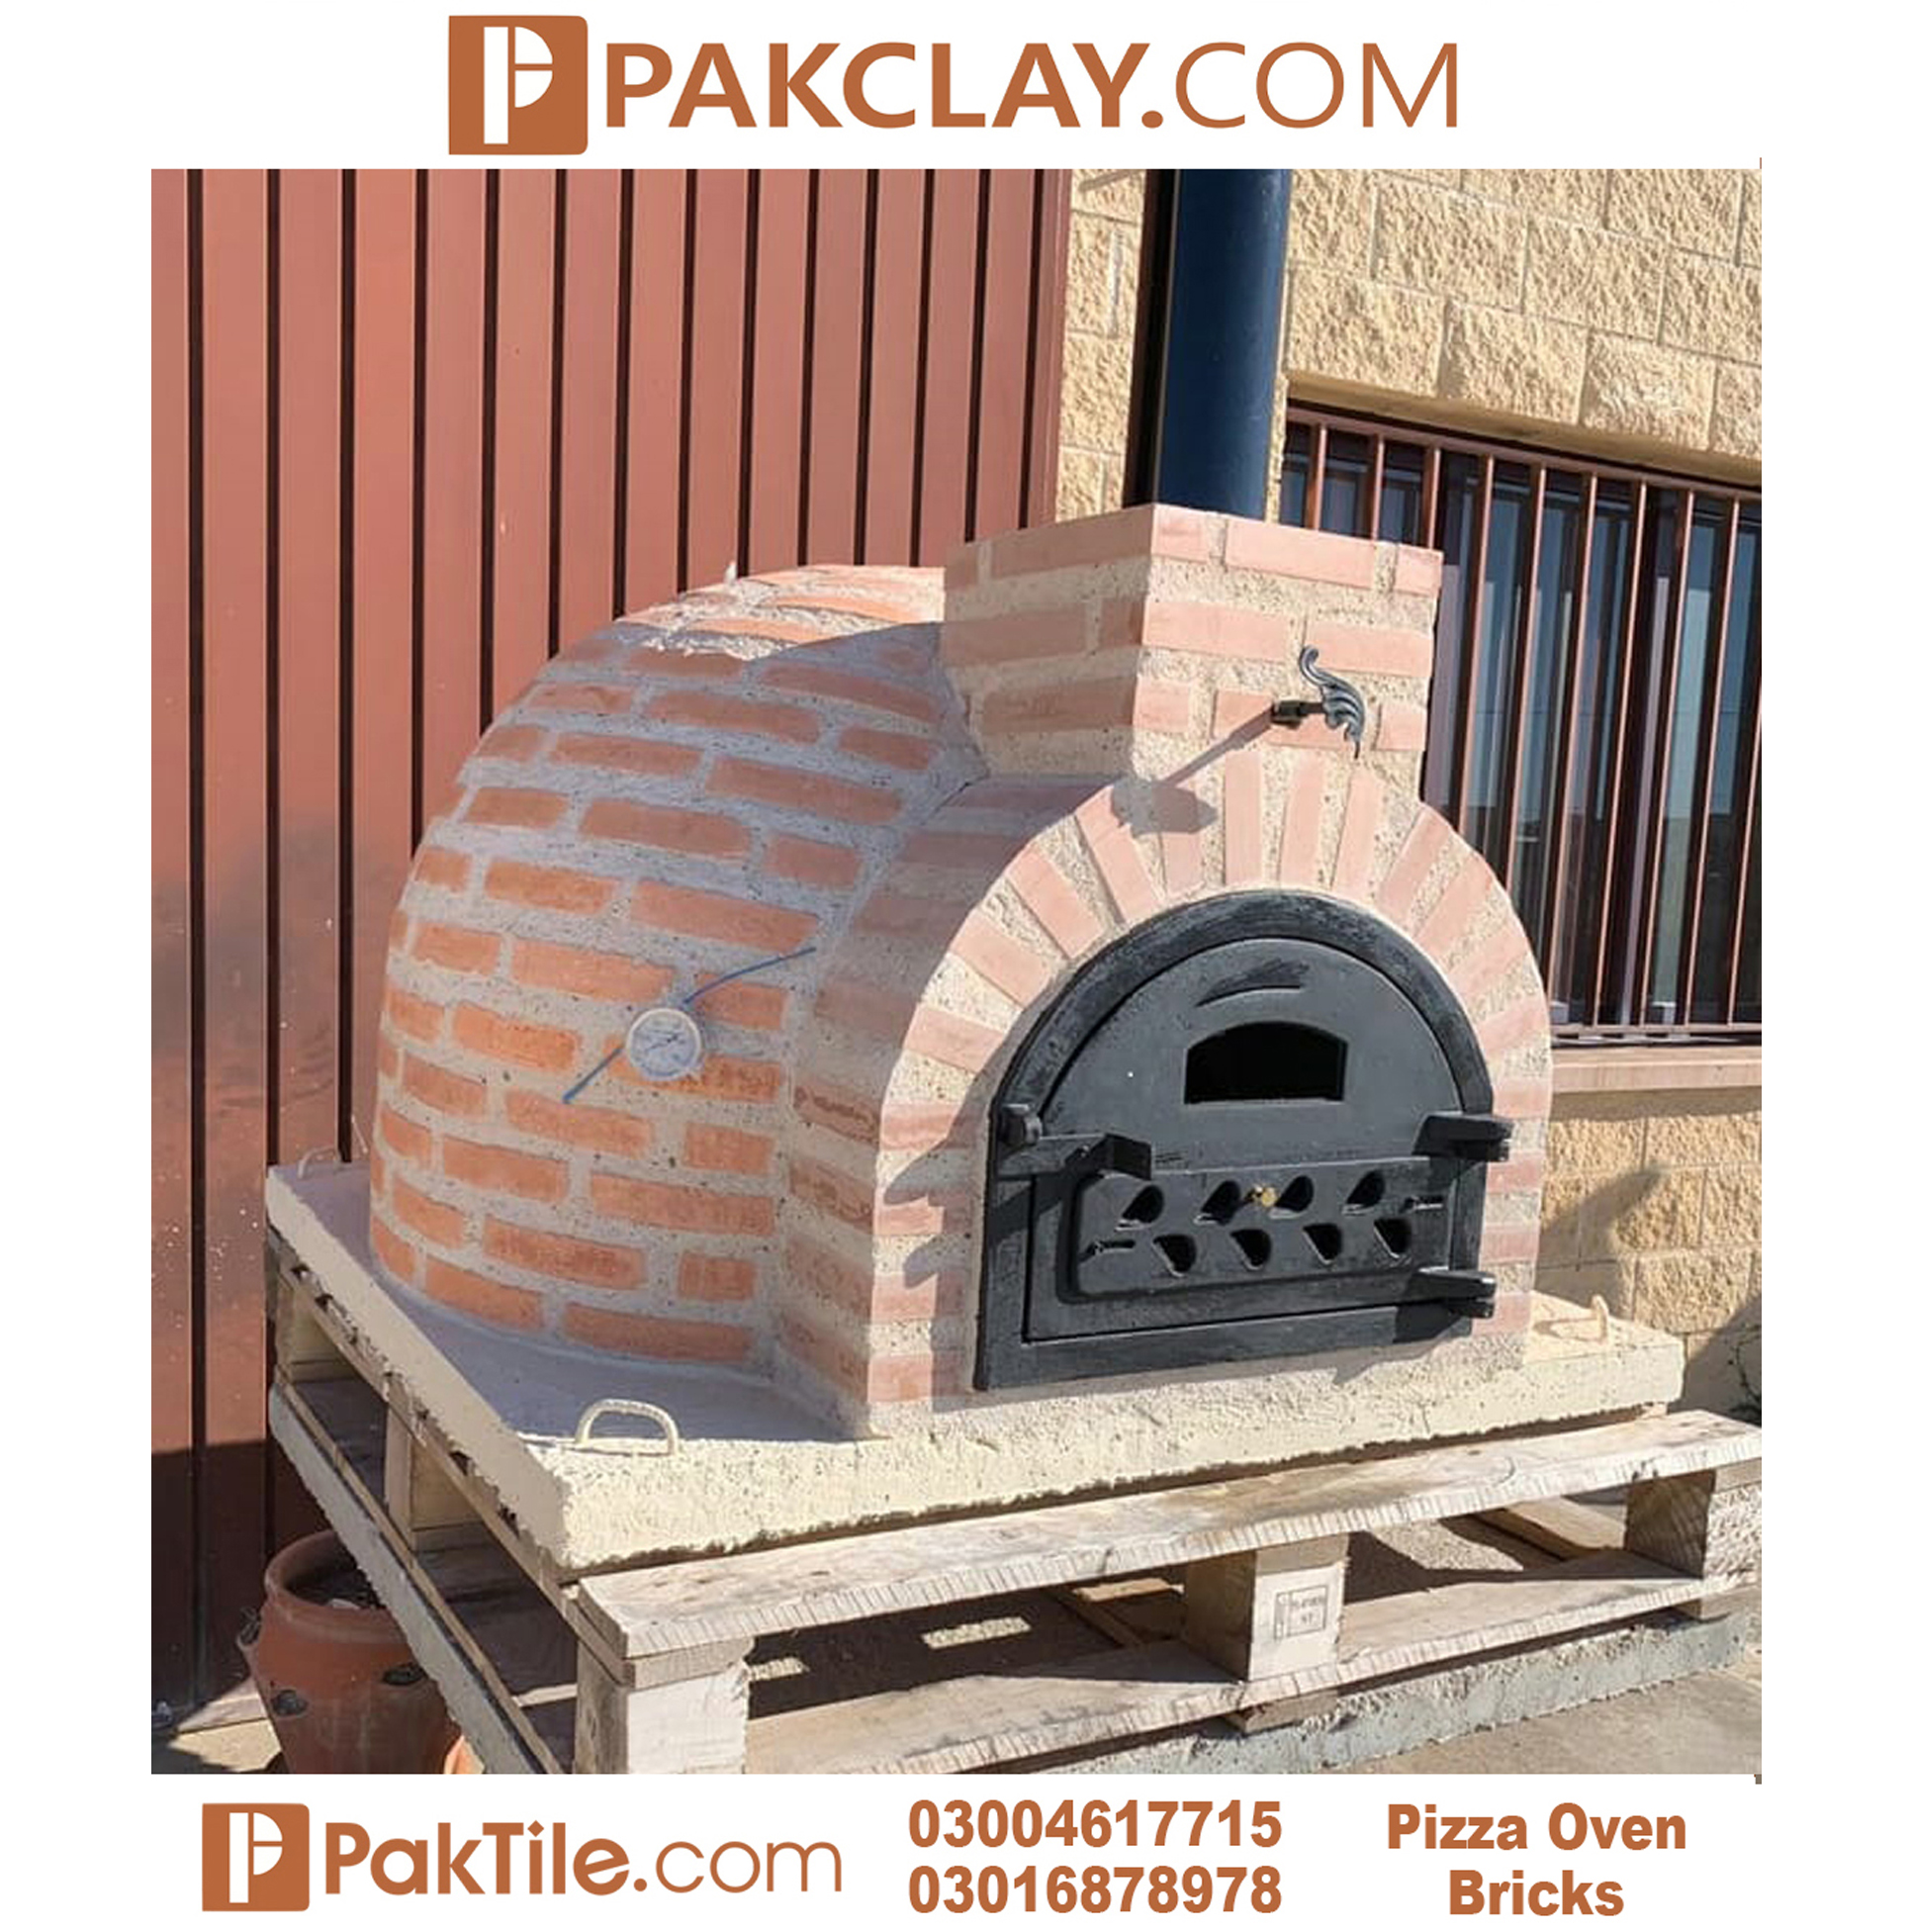 Commercial Outdoor Wood Fired Pizza Oven Lahore Islamabad